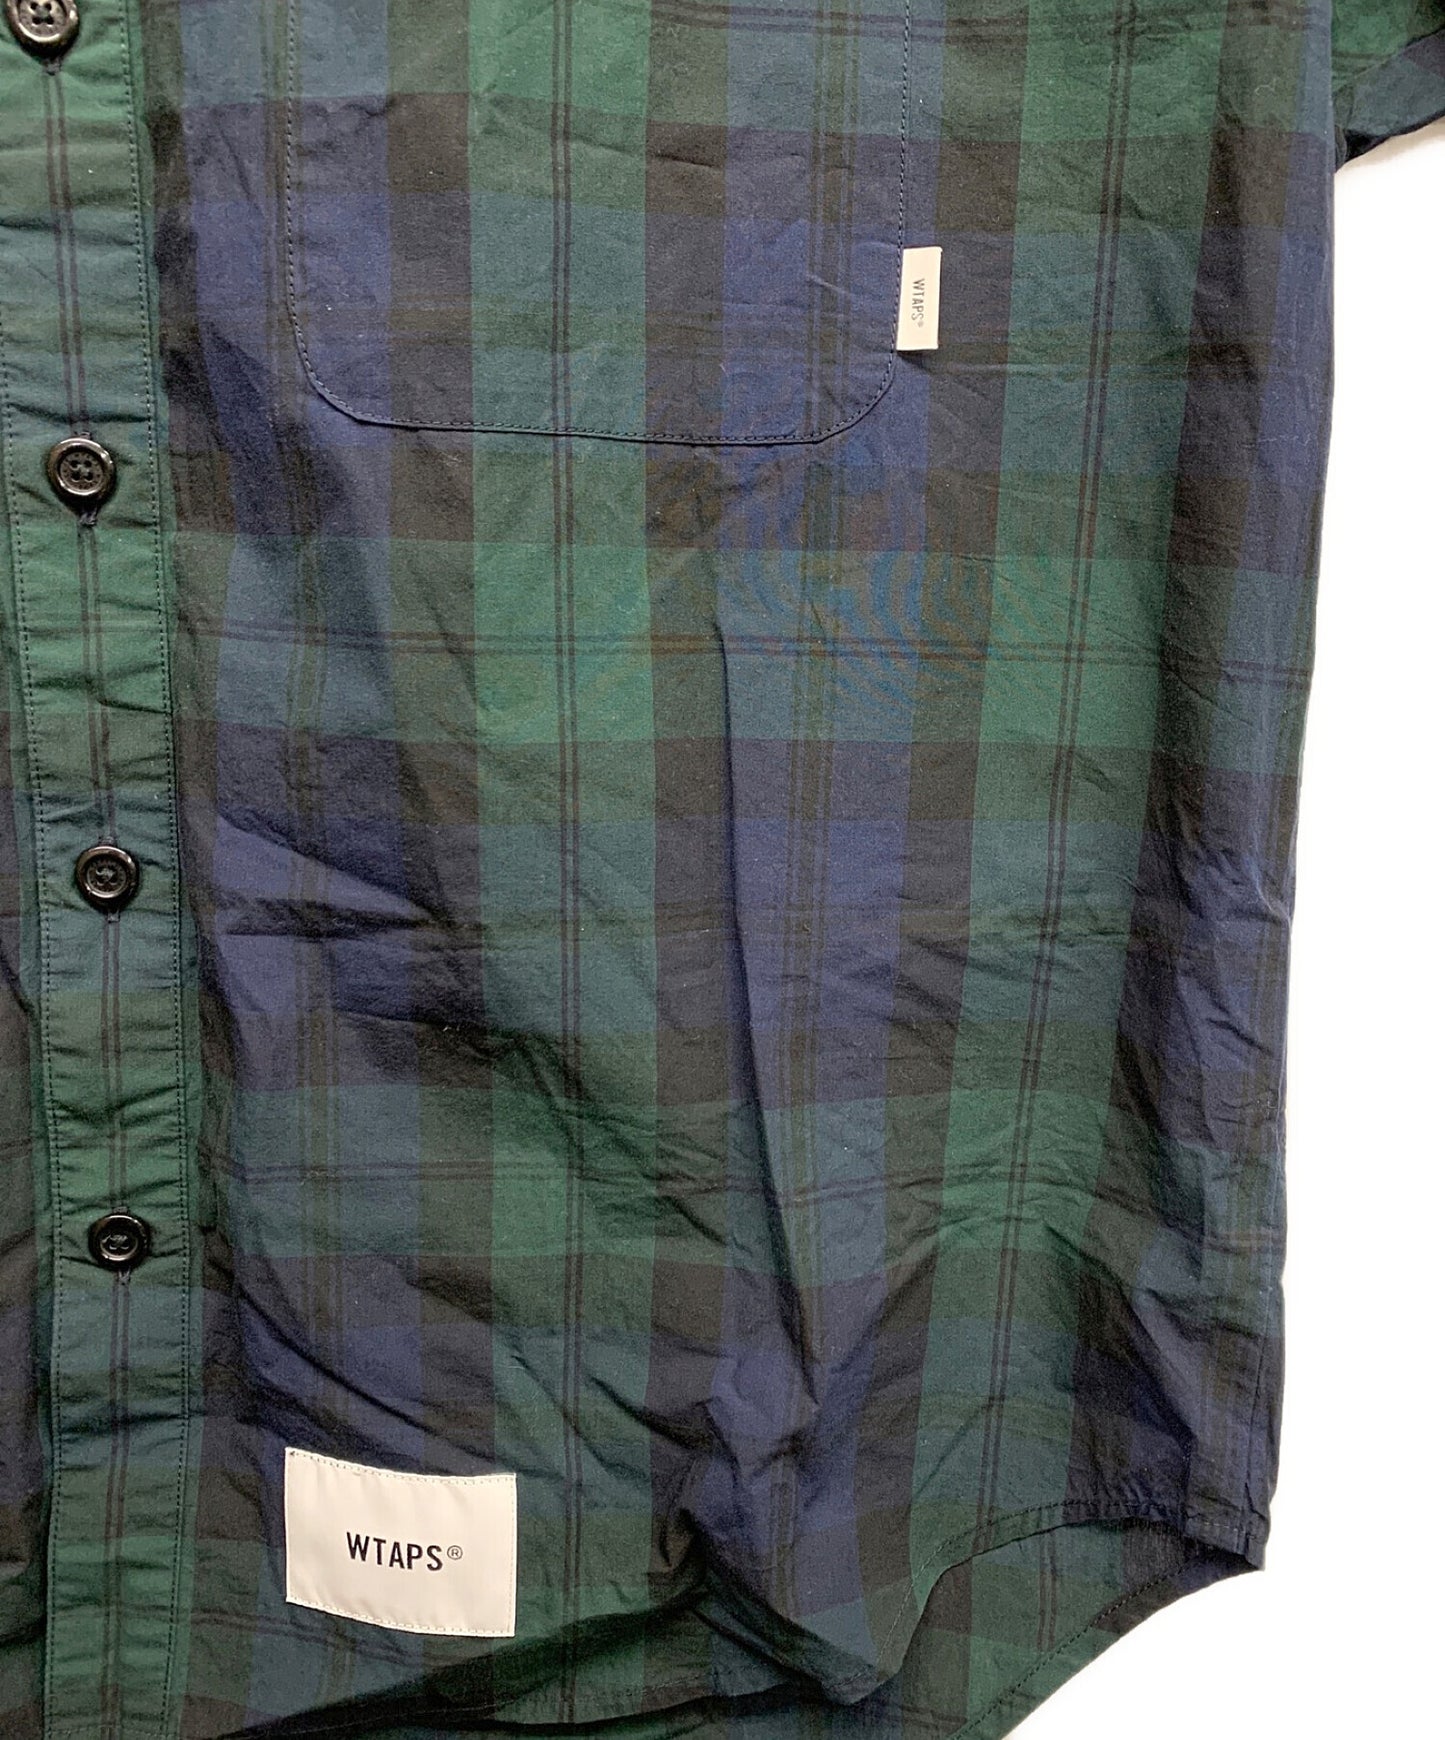 [Pre-owned] WTAPS checked shirt 221TQDT-SHM04